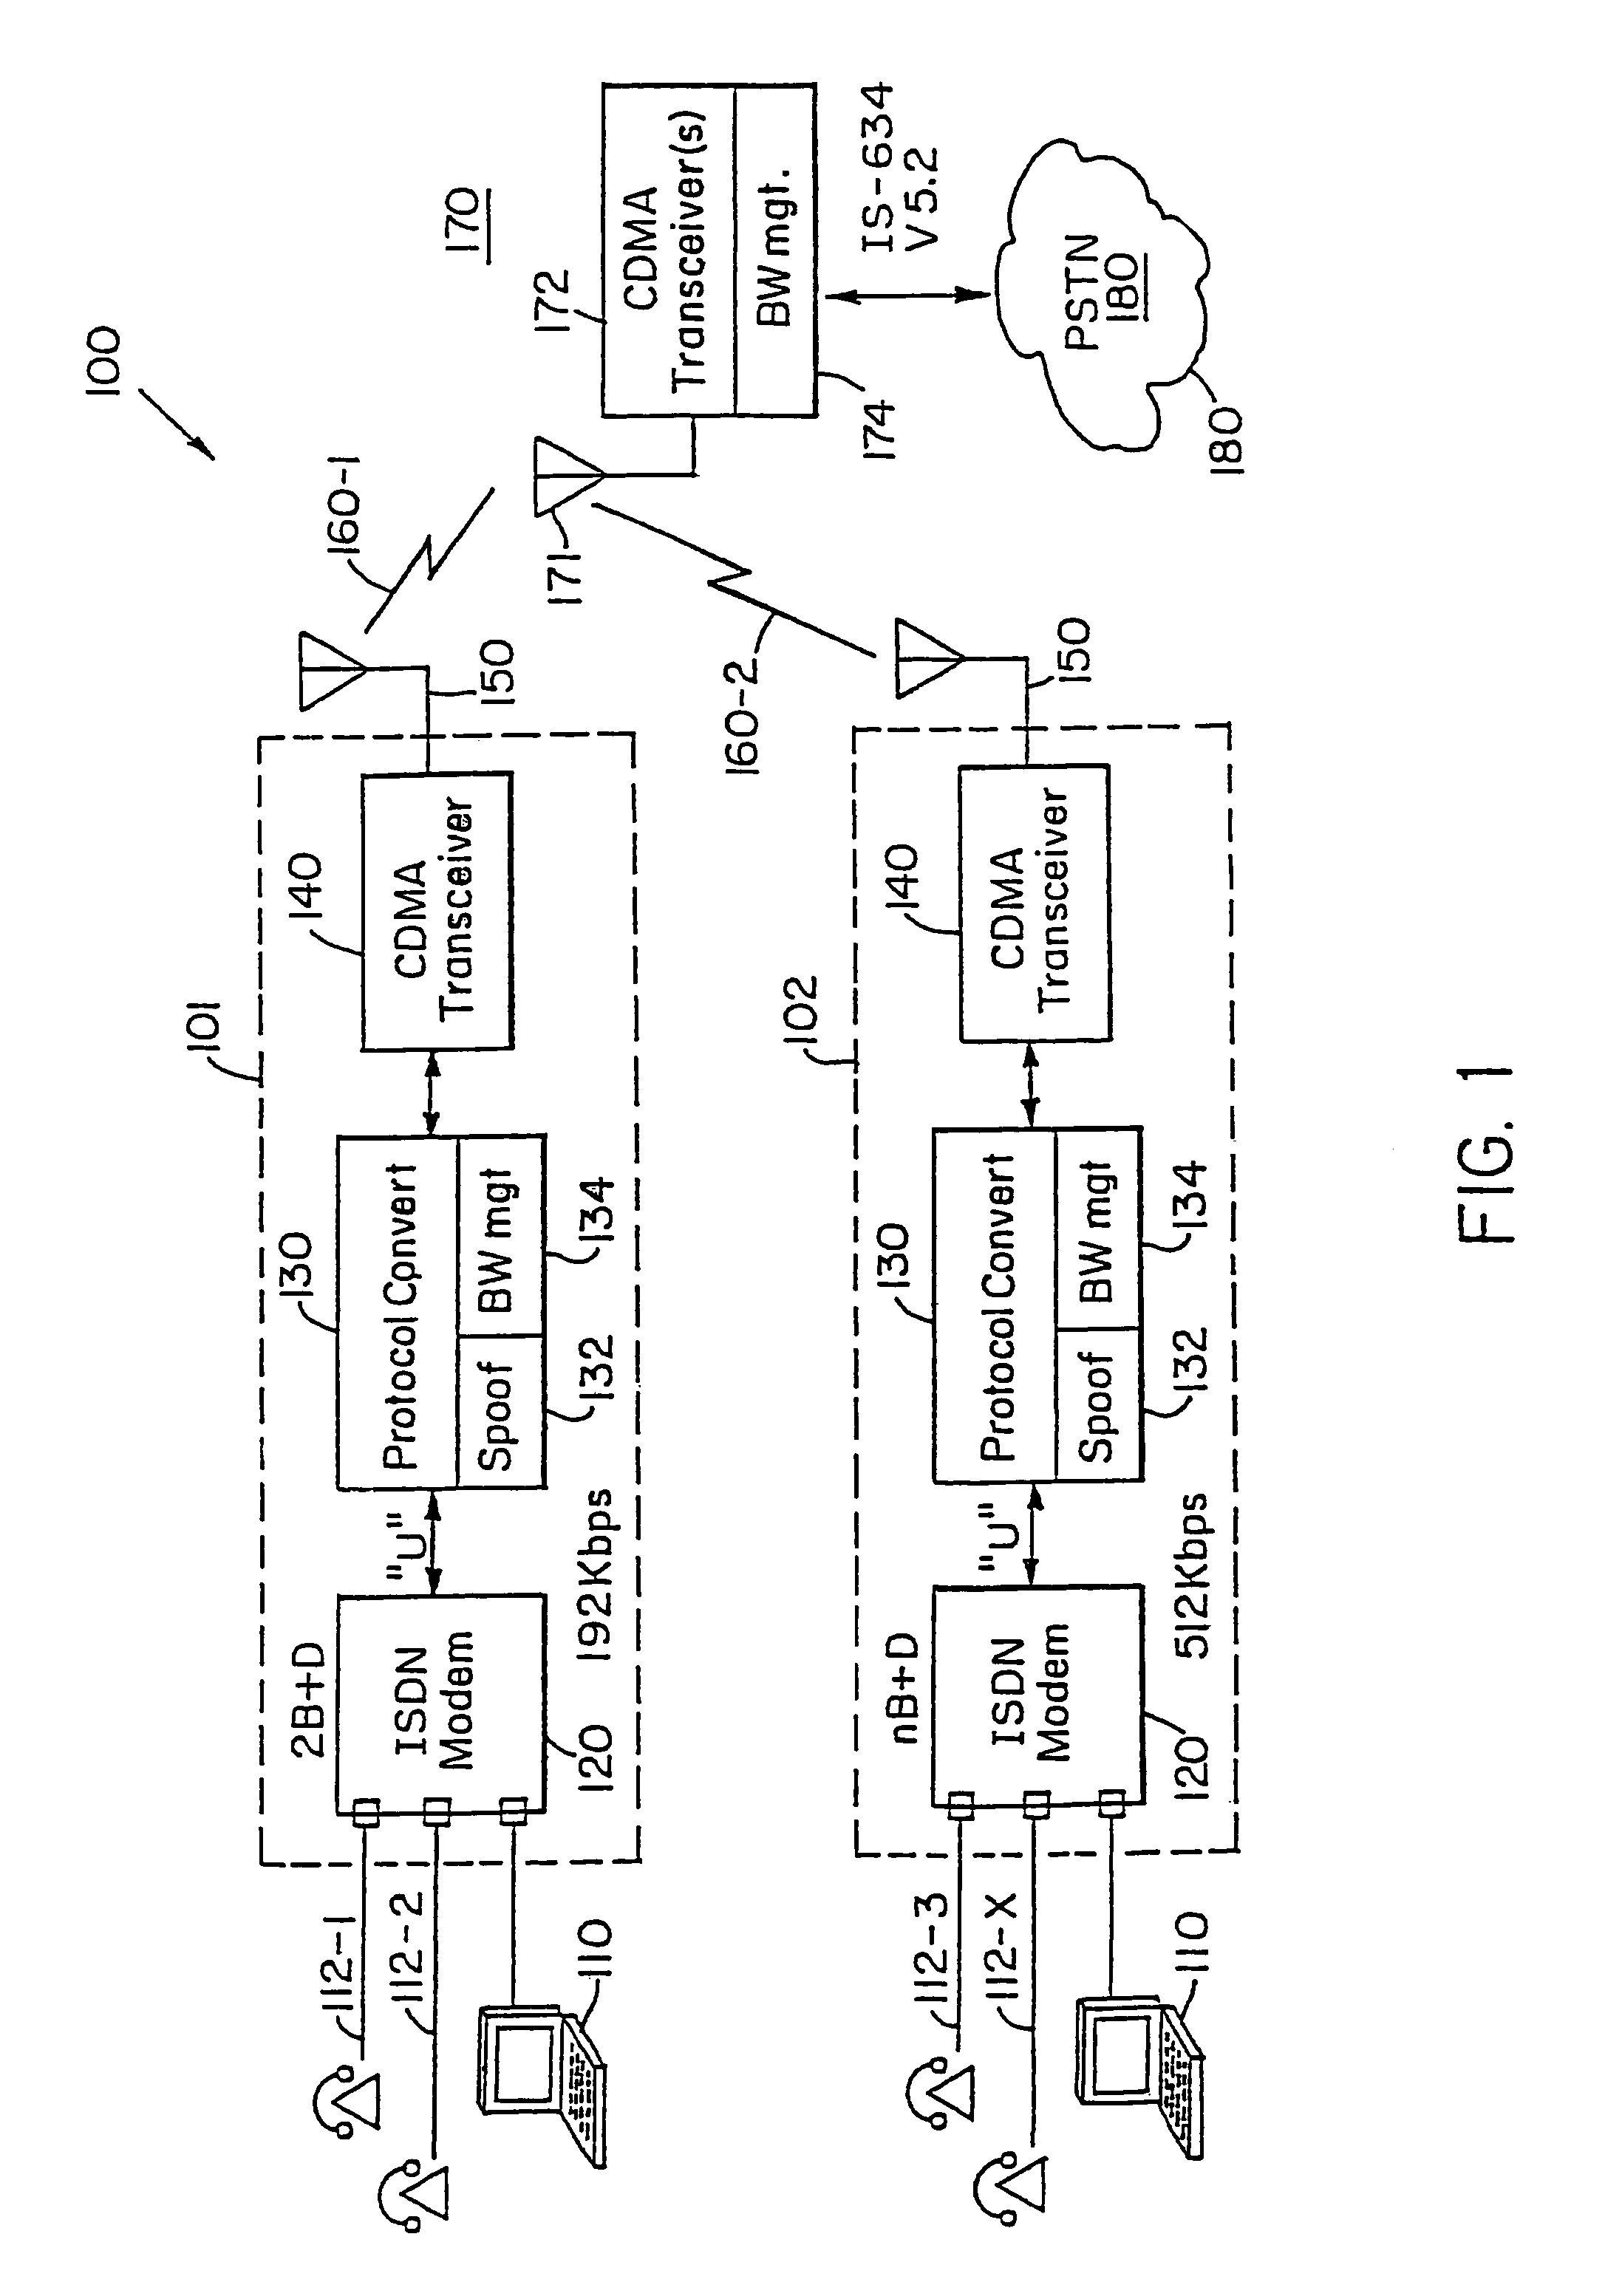 Dynamic bandwidth allocation to transmit a wireless protocol across a code division multiple access (CDMA) radio link